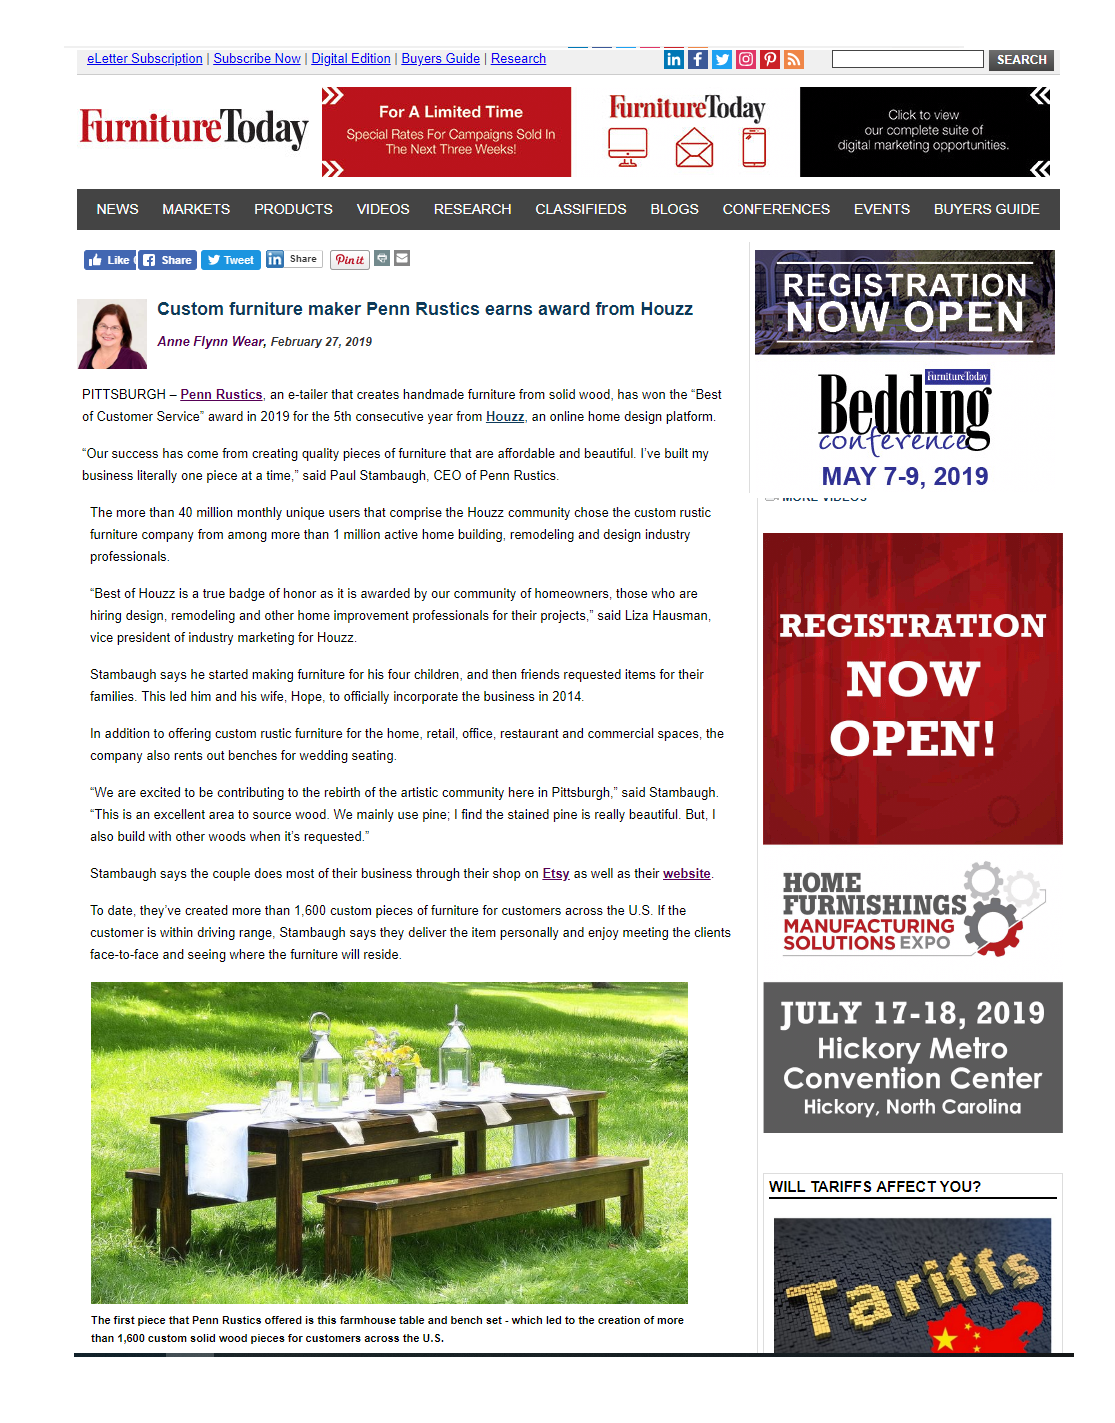 Penn Rustics_Furniture Today Article_2019_02_27.png